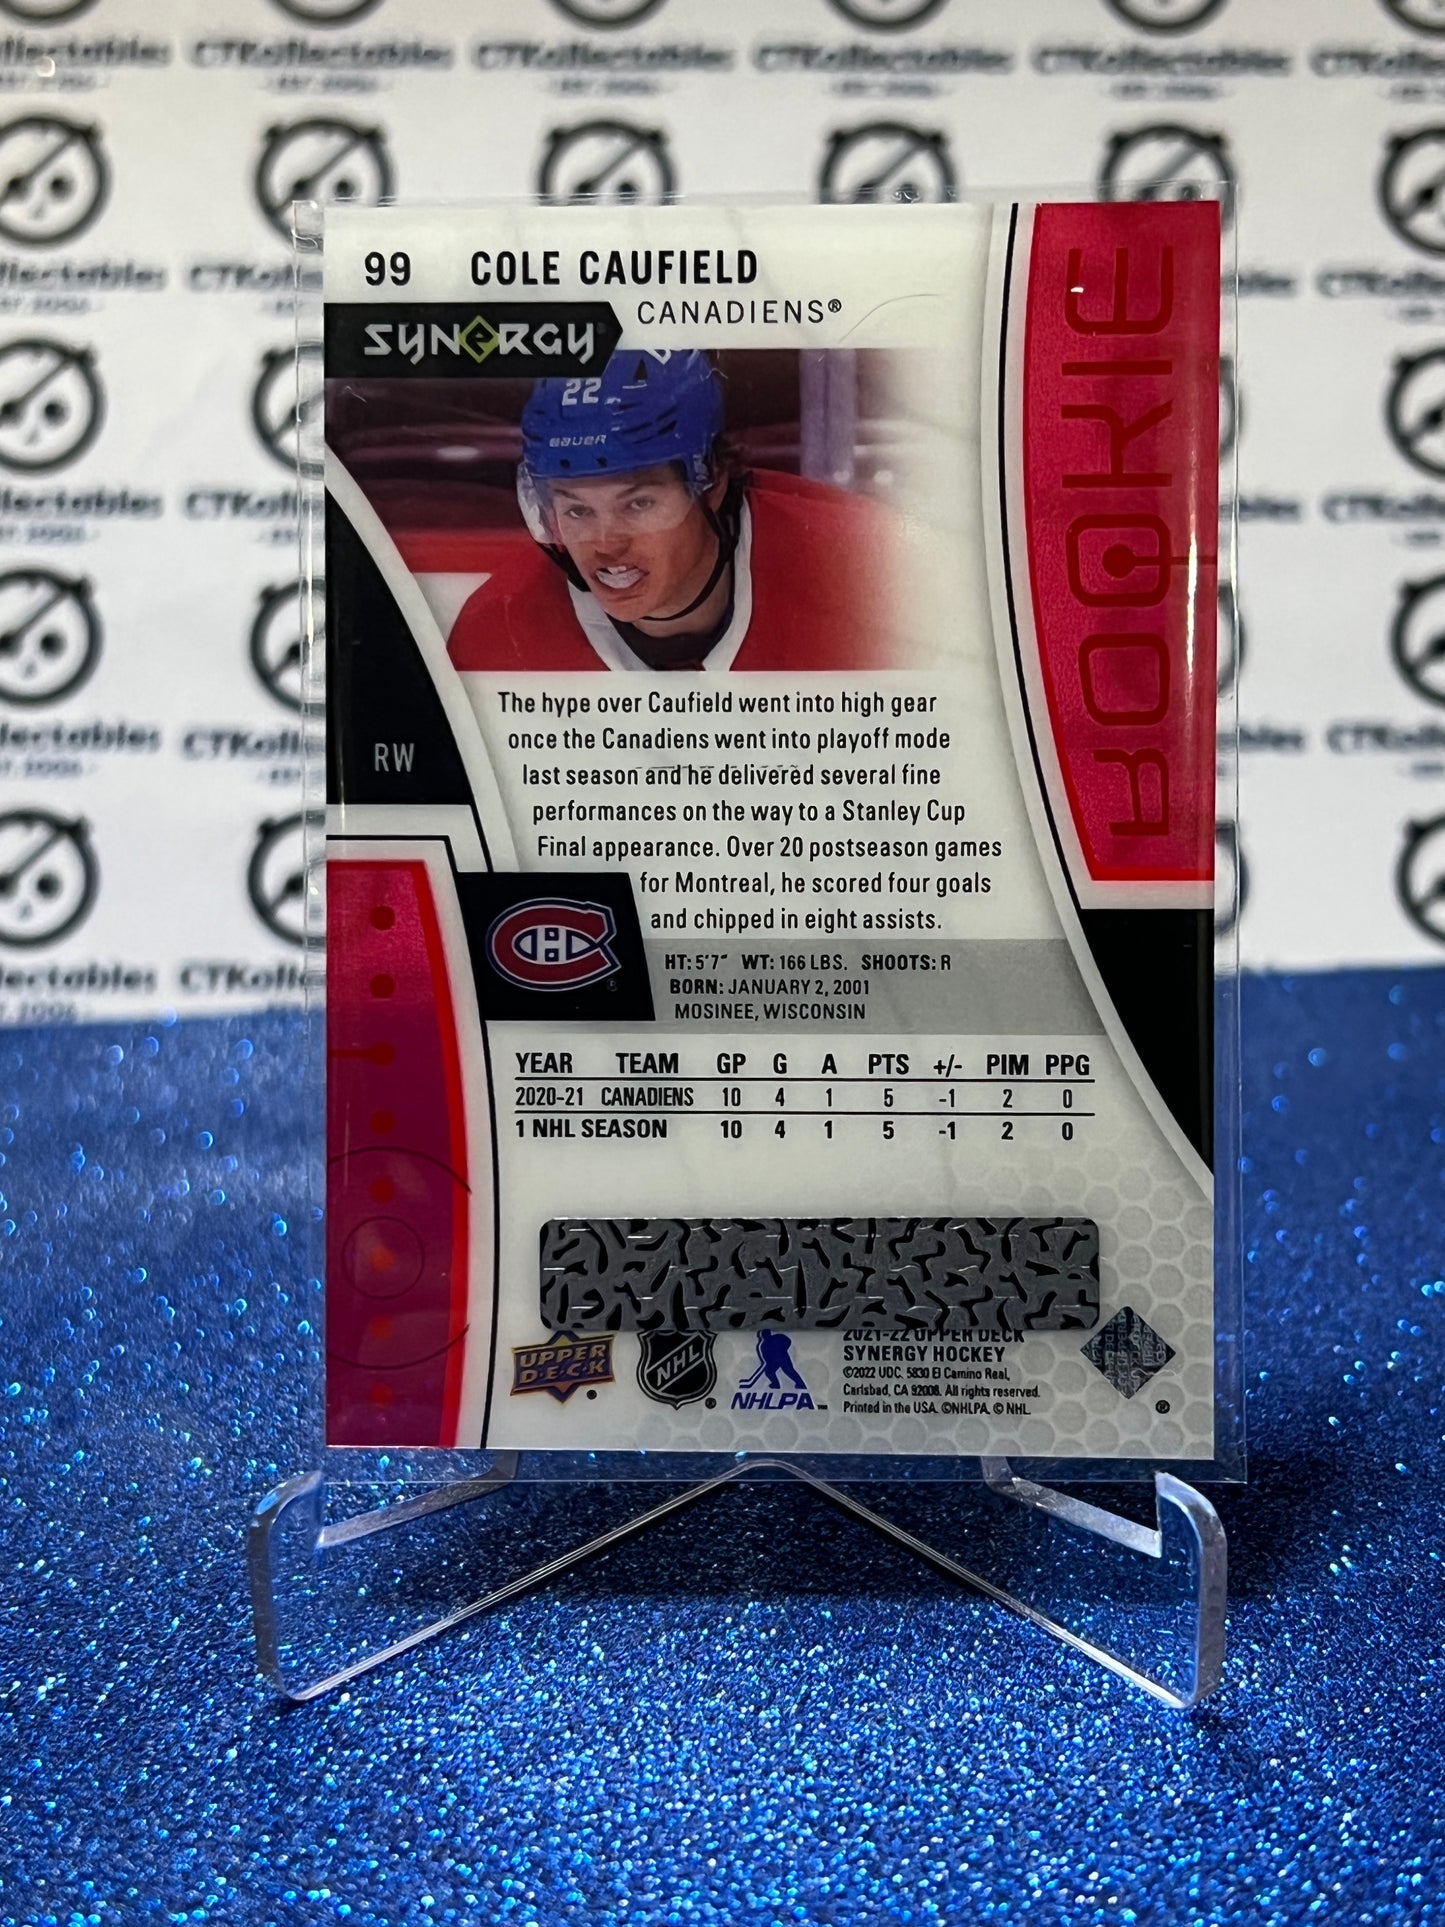 2021-22 UPPER DECK SYNERGY COLE CAUFIELD # 99 RED BOUNTY ROOKIE MONTREAL CANADIENS HOCKEY CARD